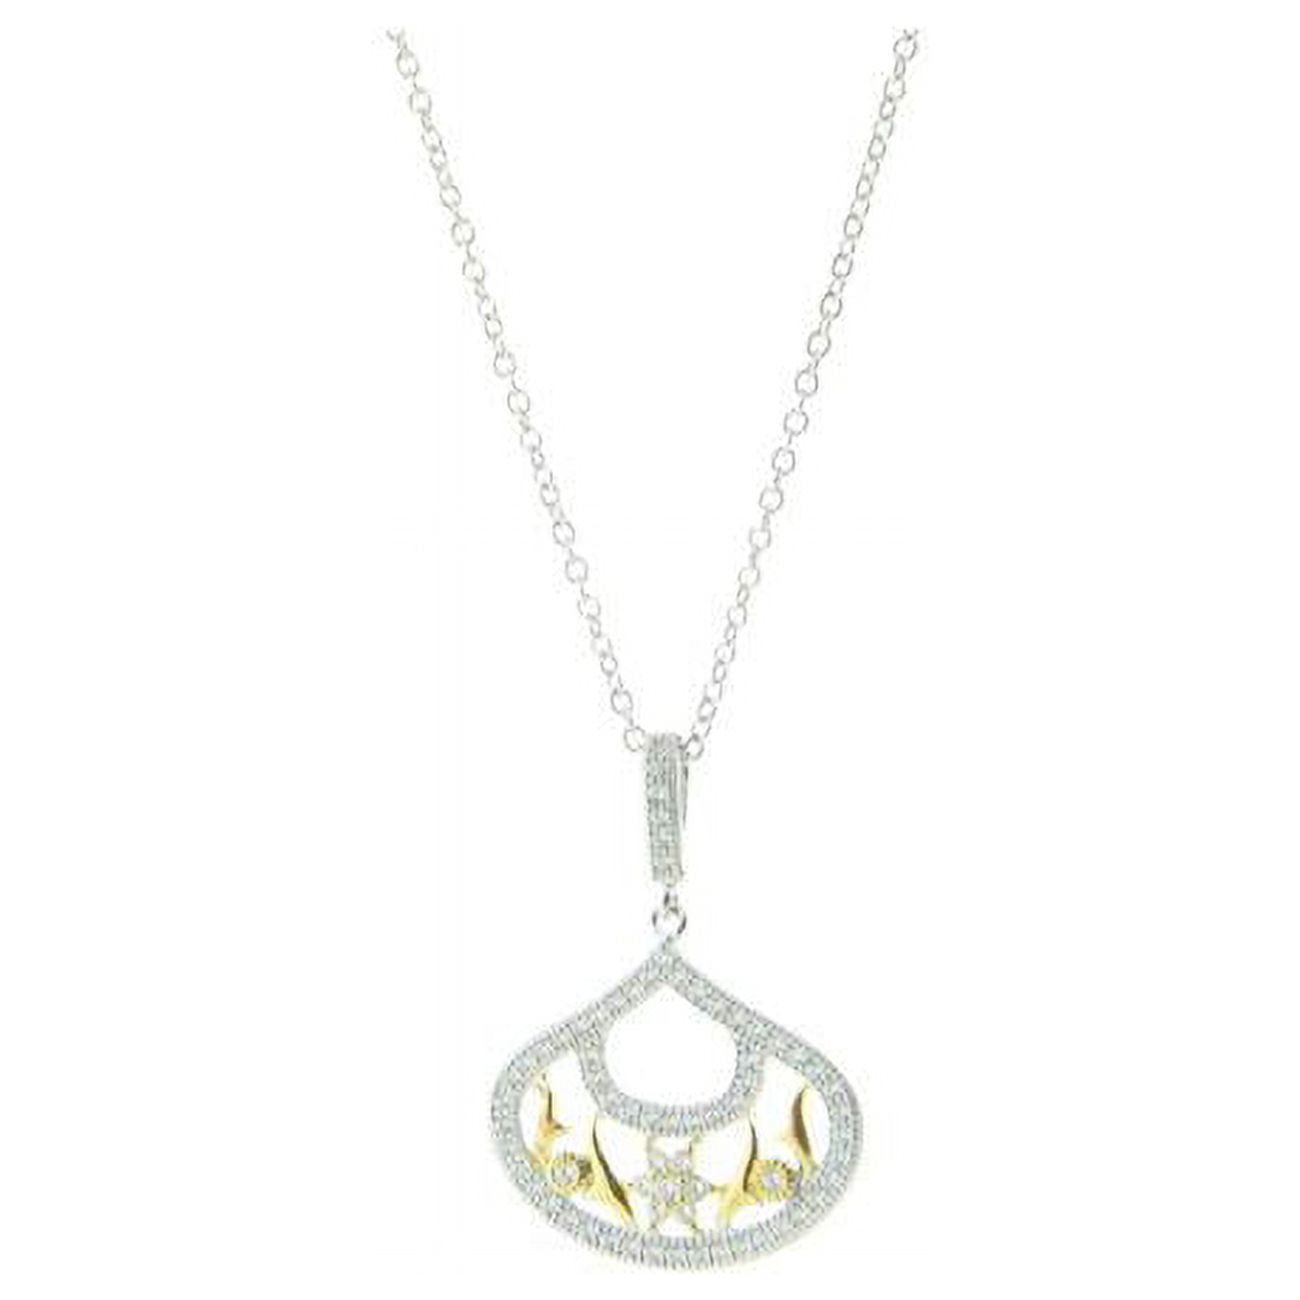 101168 Royal Gala Two Tone Cz Necklace In Sterling Silver